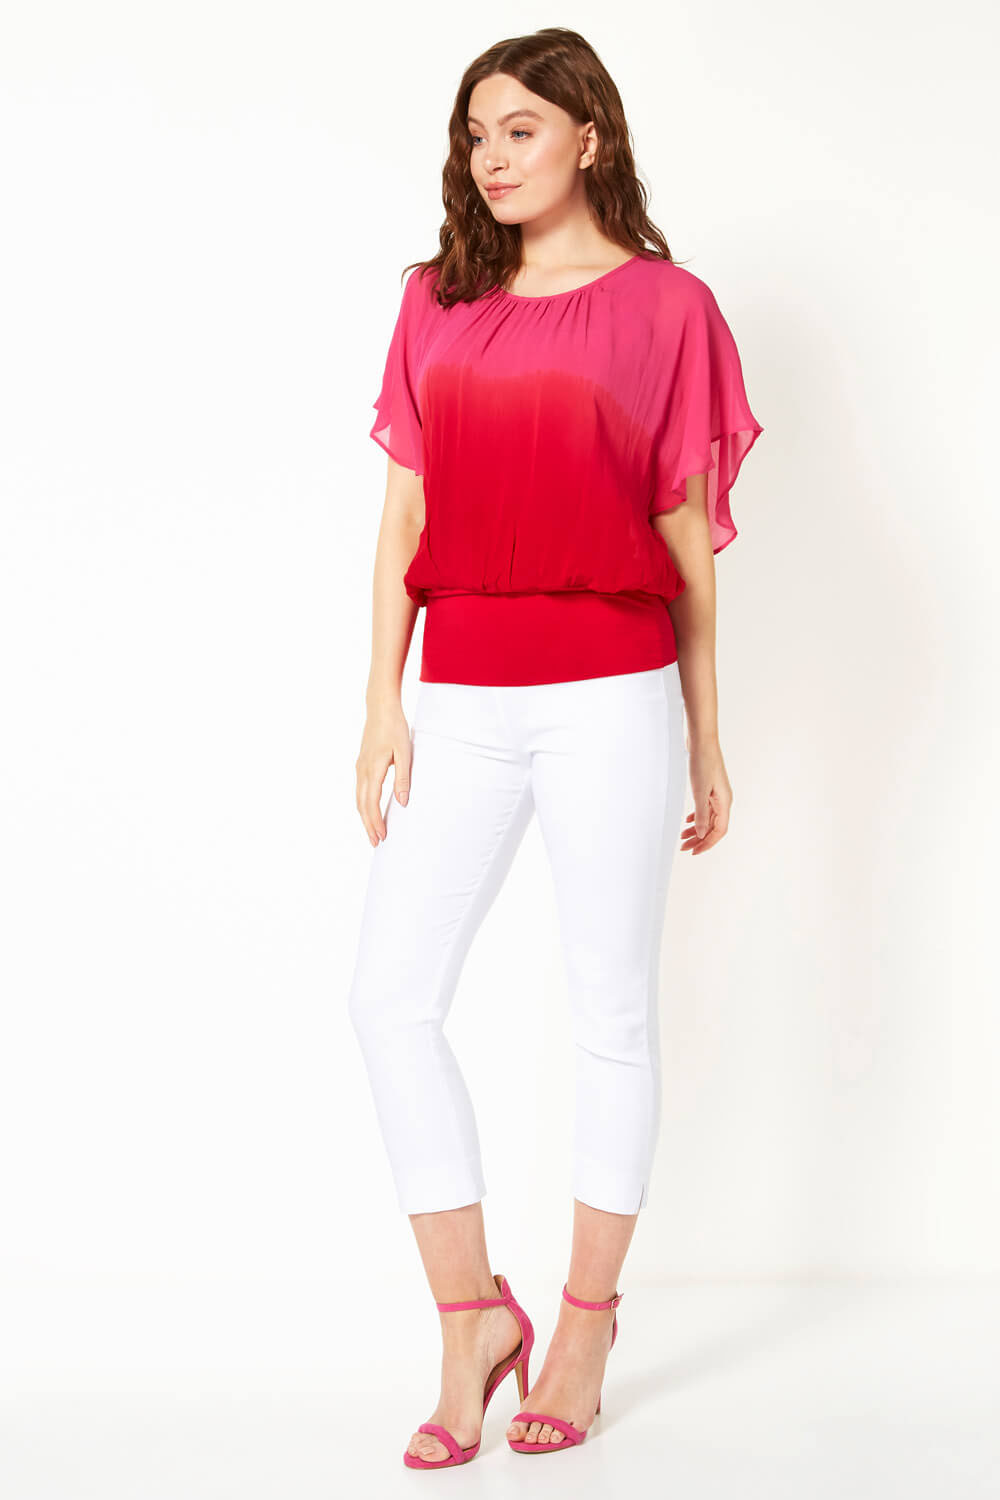 Fuchsia Ombre Batwing Overlay Top, Image 4 of 5